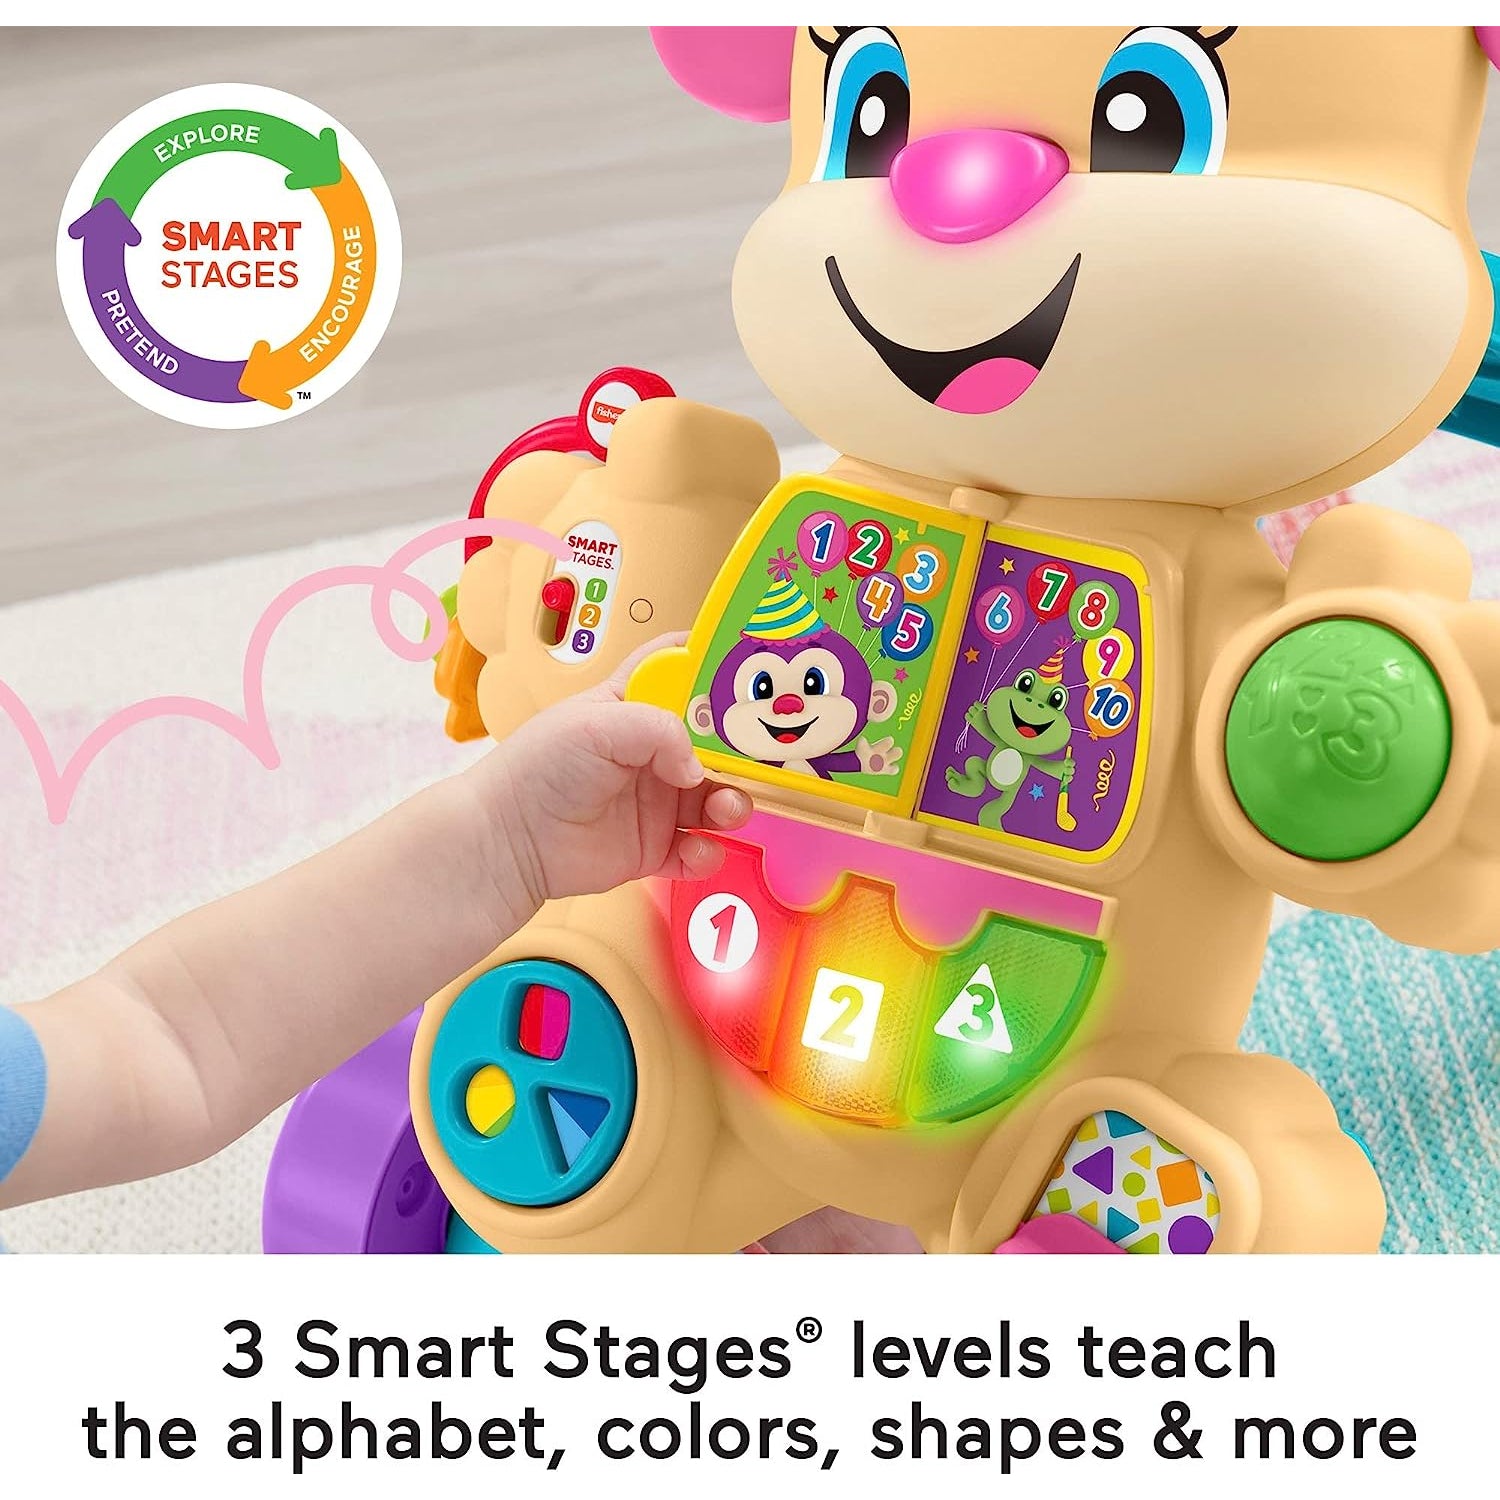 Fisher-Price Laugh & Learn Baby to Toddler Toy Let?s Connect